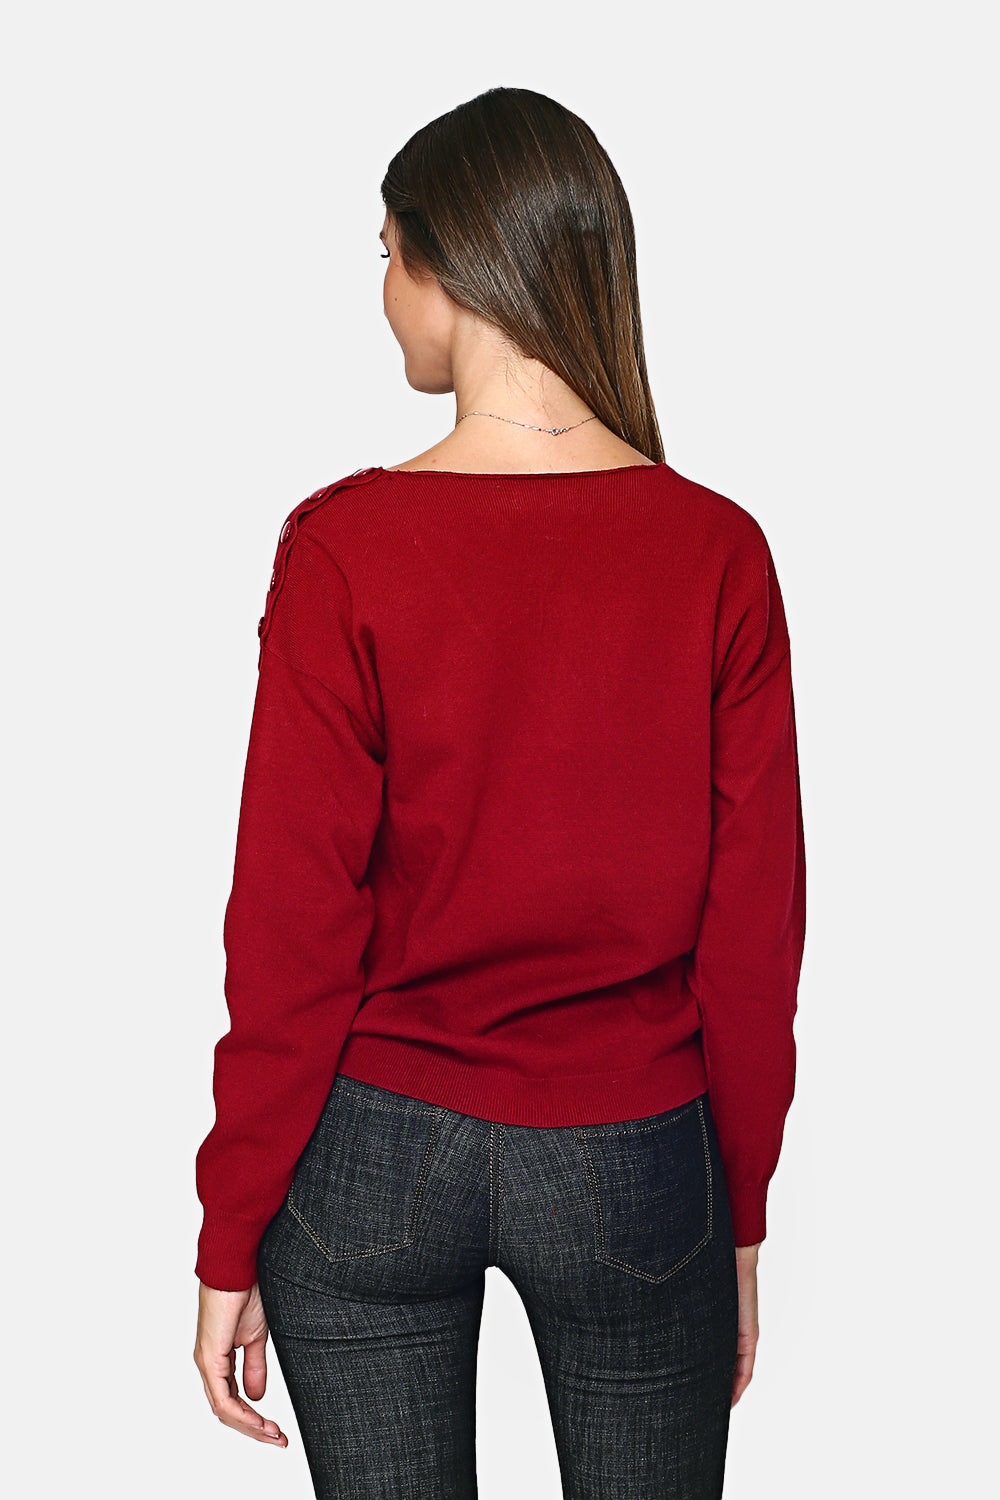 V-neck sweater closed by a shoulder button placket with long sleeves